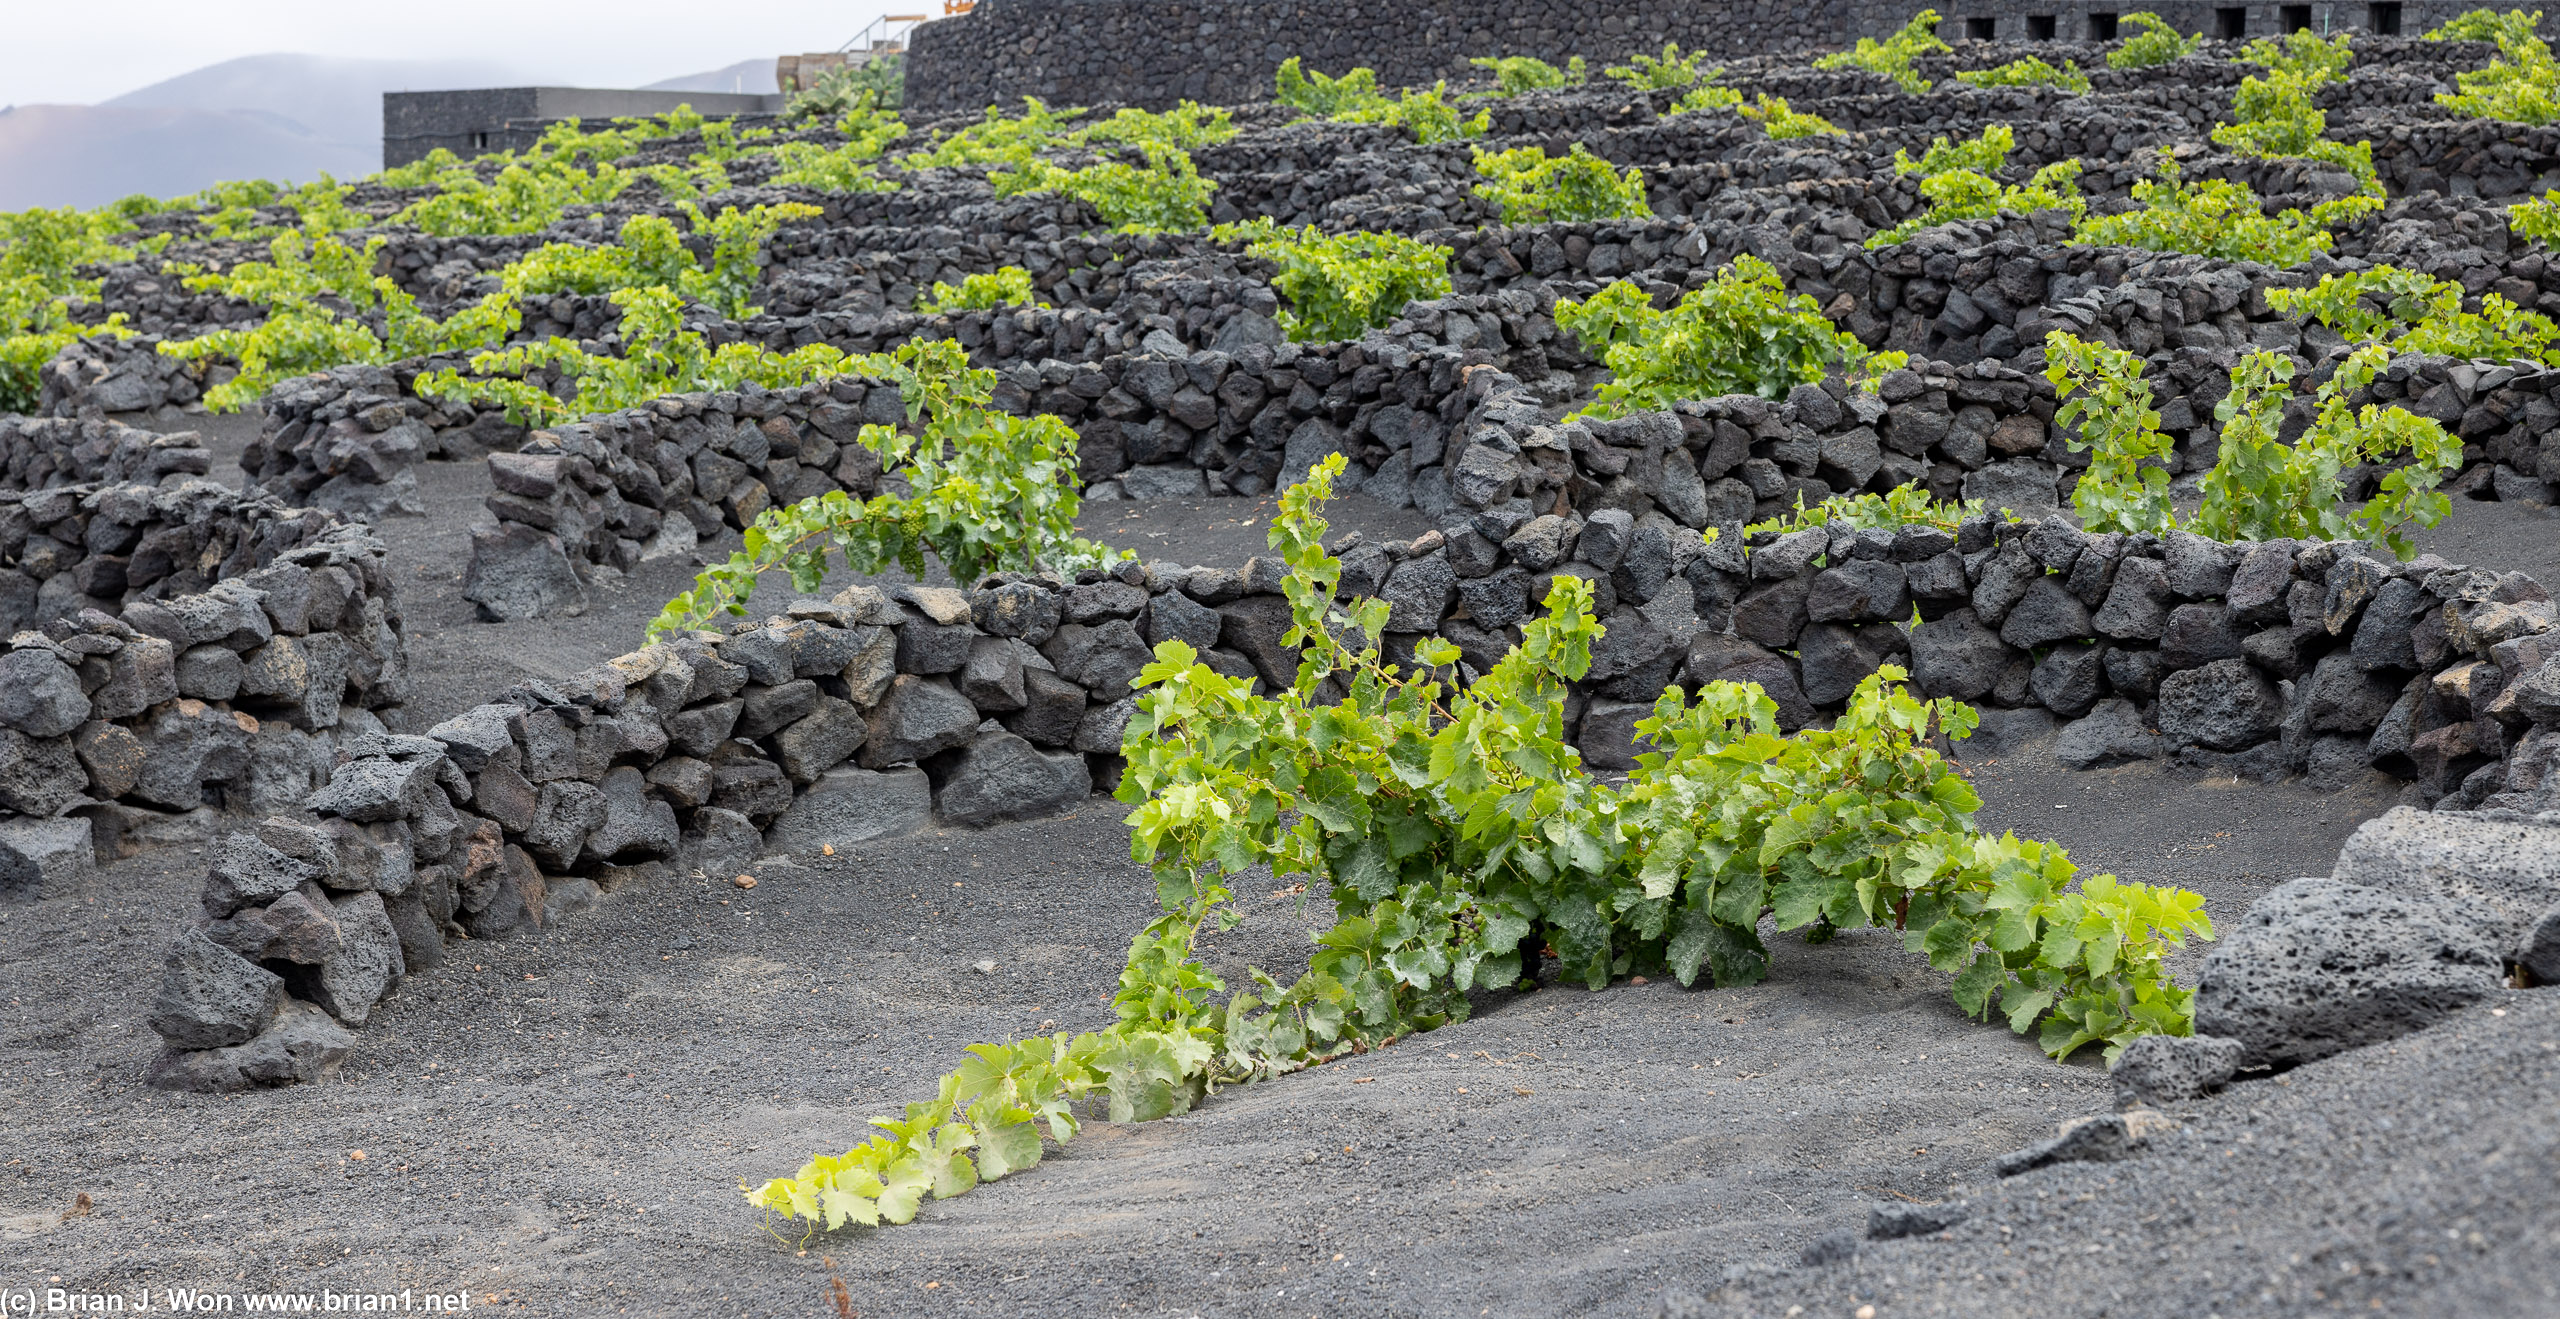 Close-up of the grapevines huddled below their rocky windbreaks.